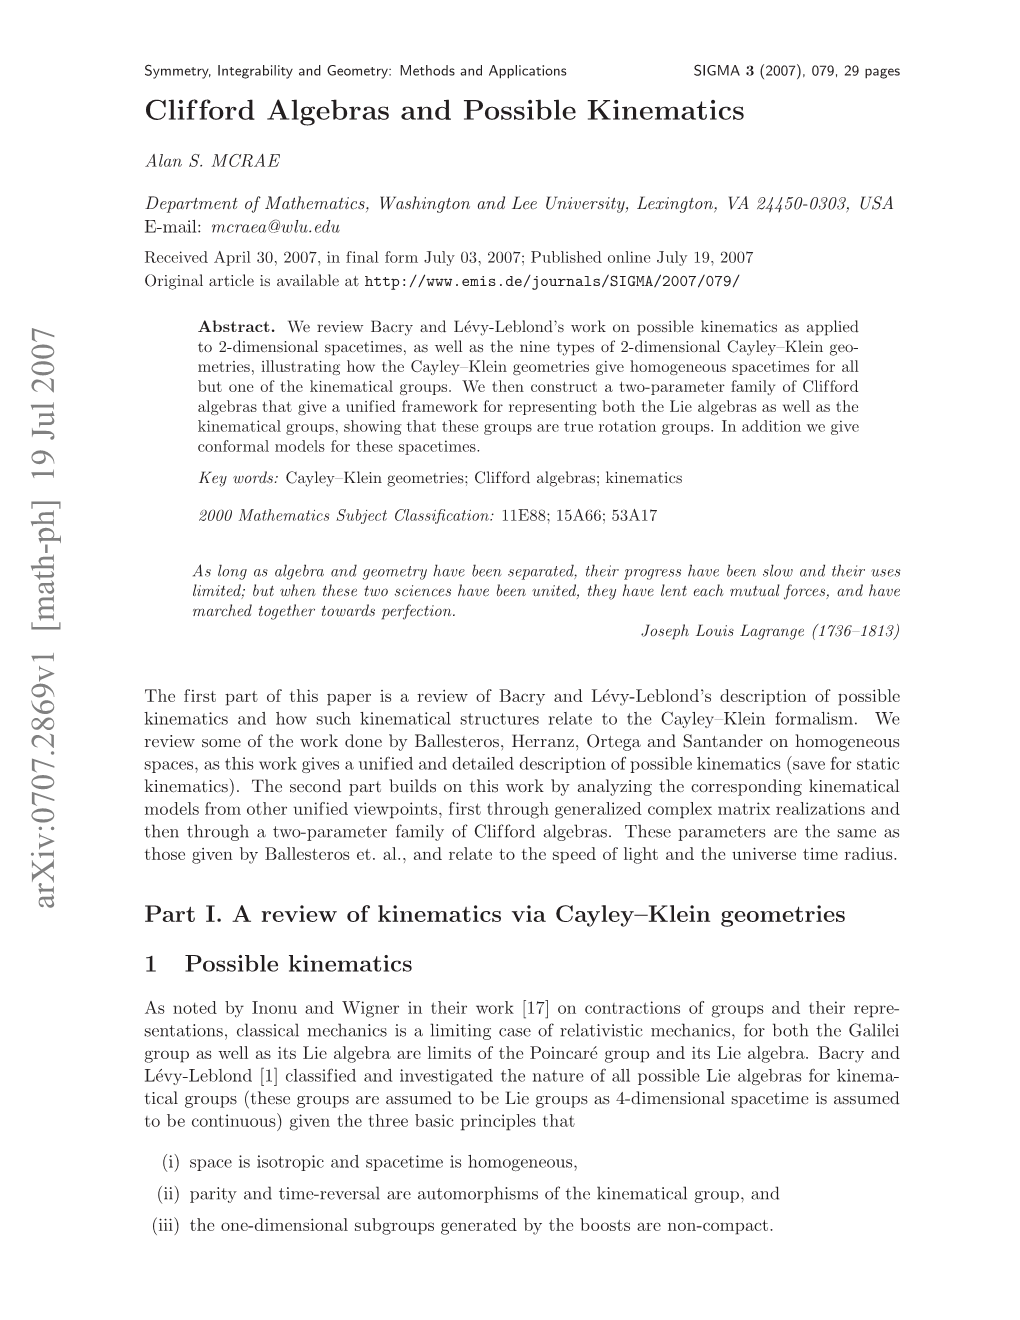 Clifford Algebras and Possible Kinematics 3